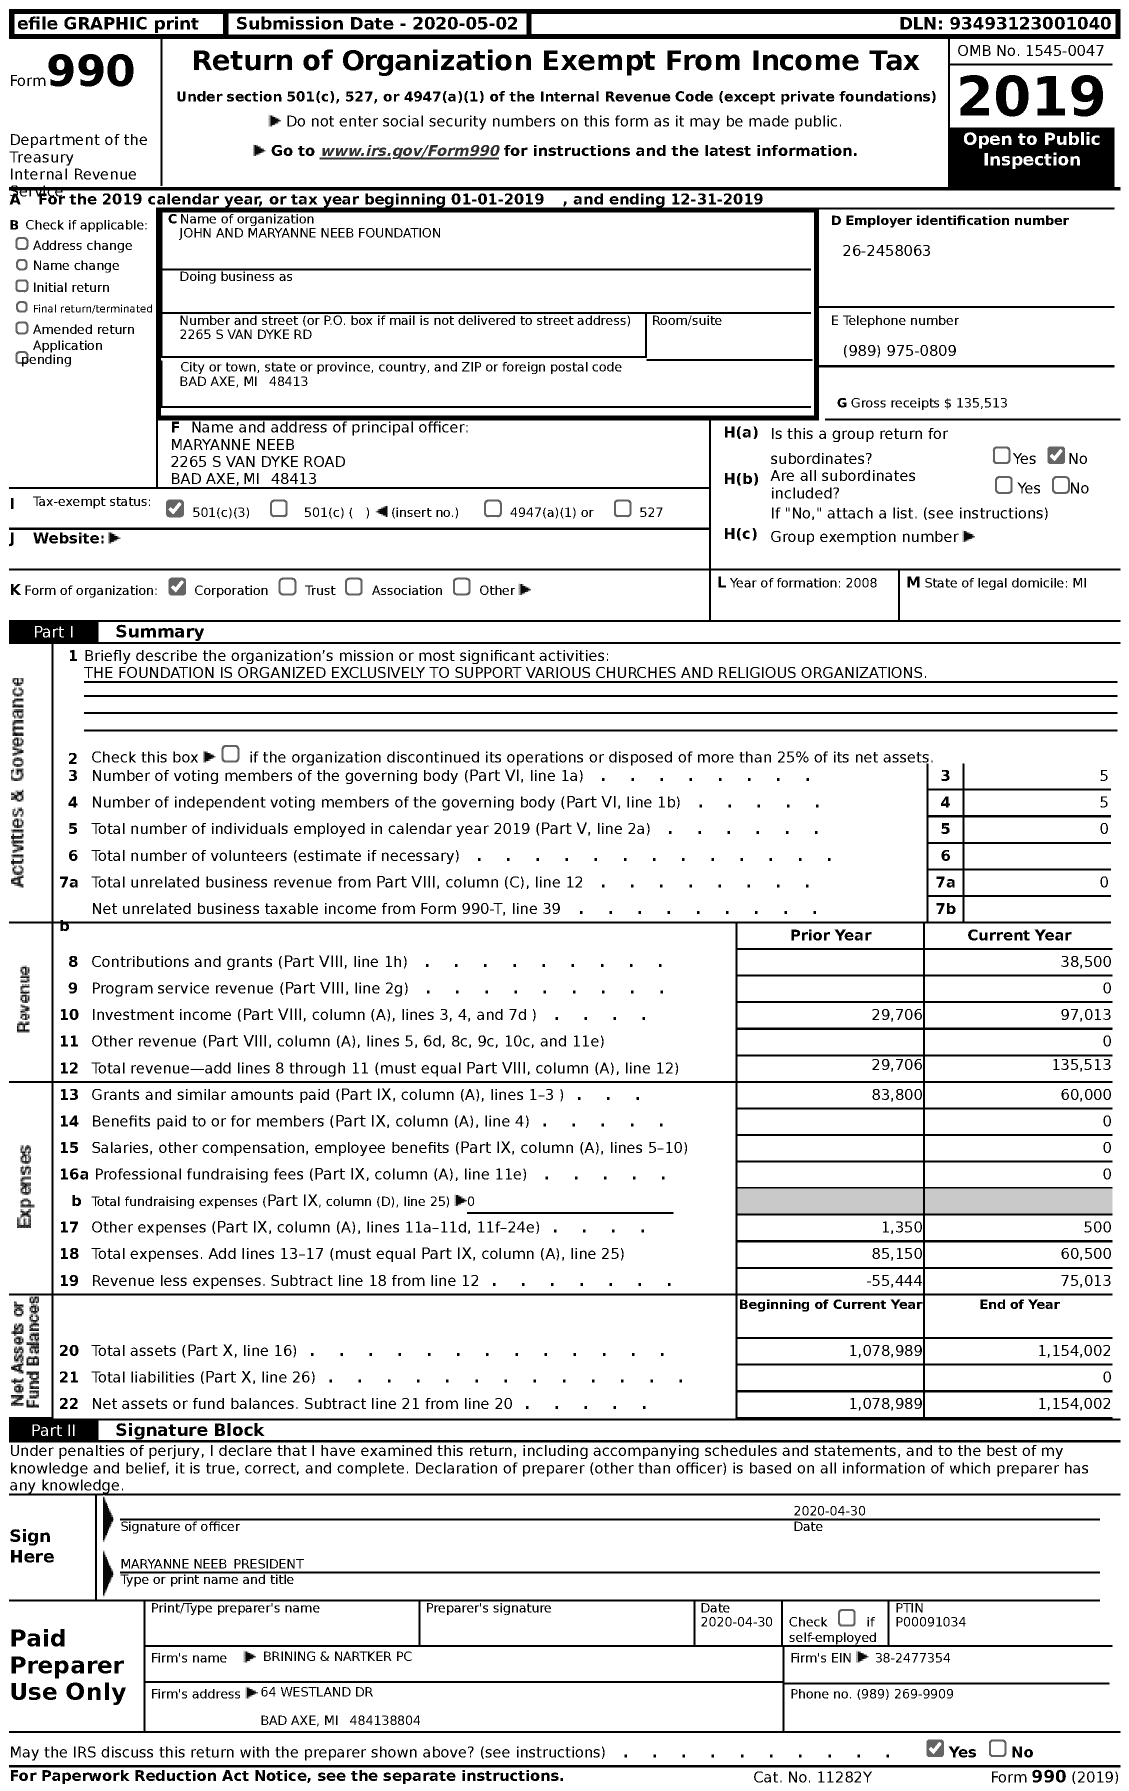 Image of first page of 2019 Form 990 for John and Maryanne Neeb Foundation